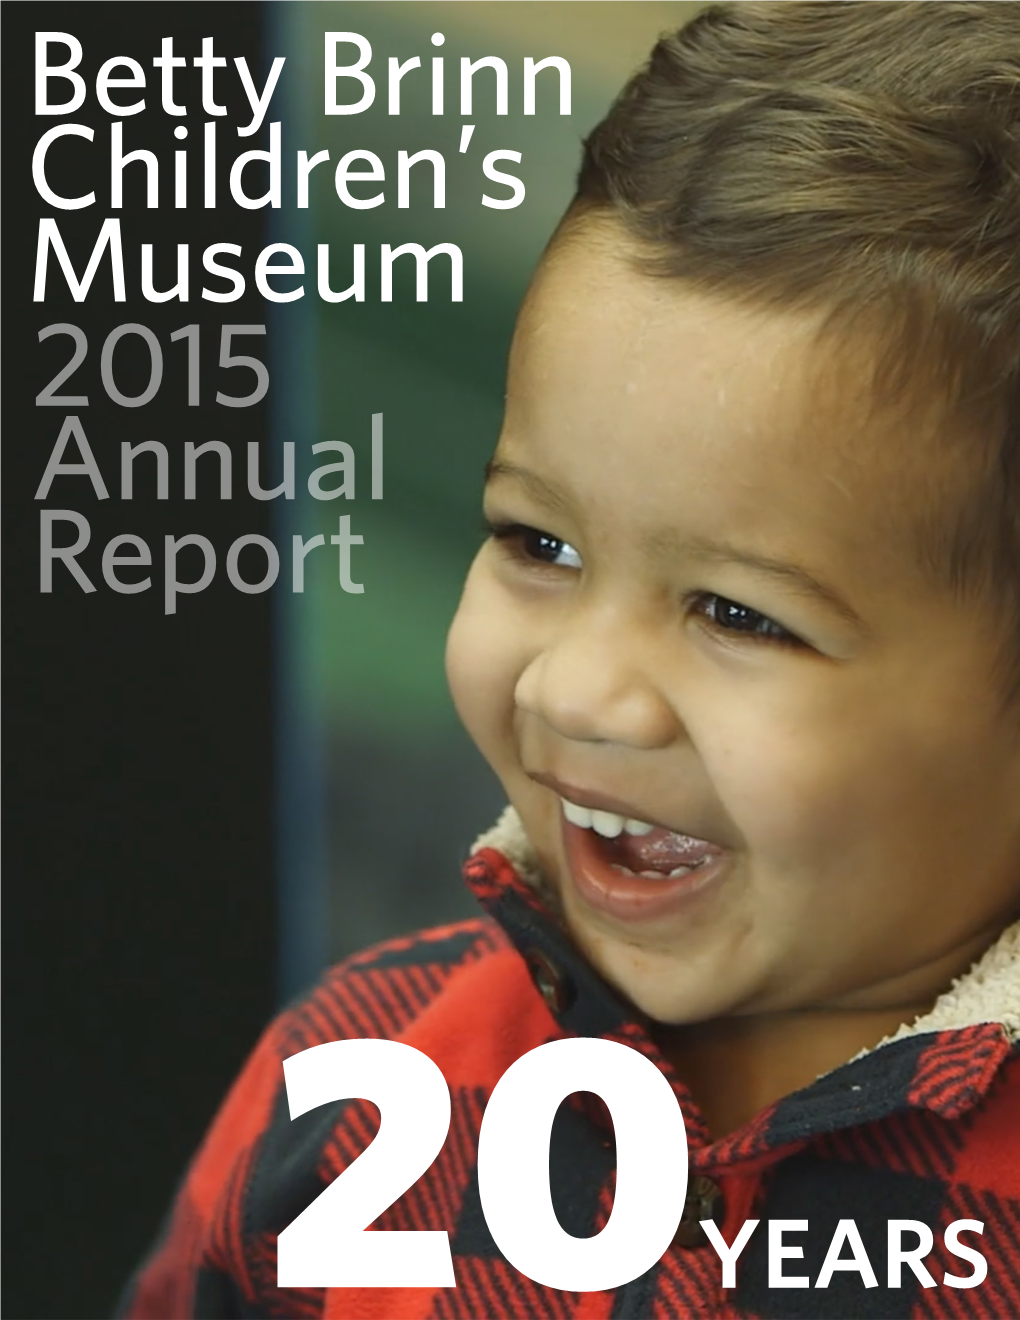 View the Museum's 2015 Annual Report